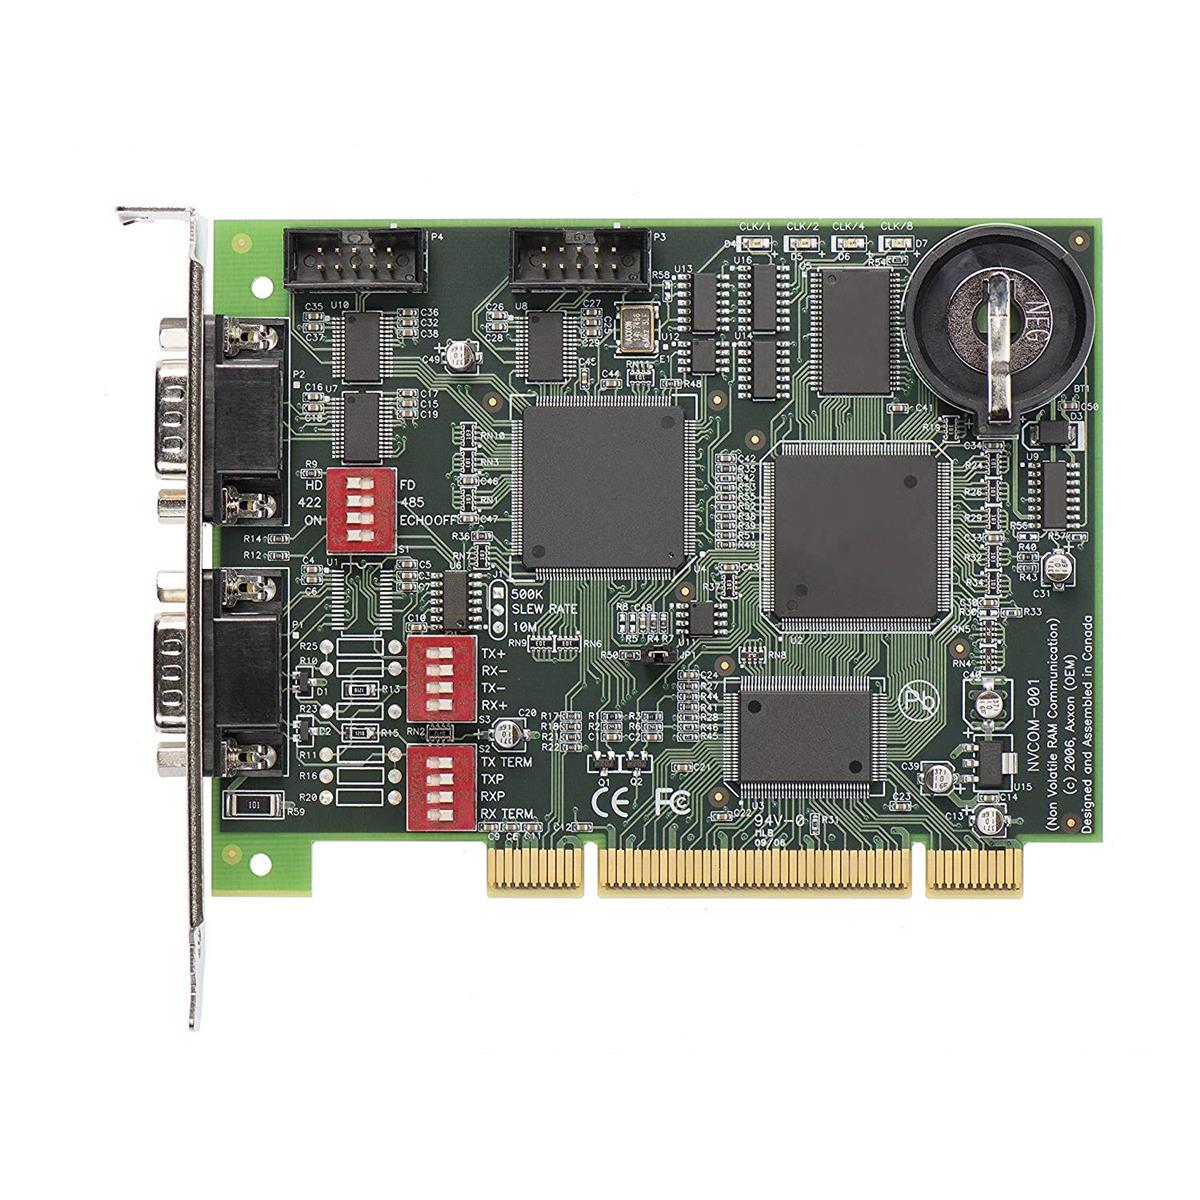 Image of Axxon Universal PCI Multi-Port 1 Port RS422/RS485 + 3 Ports RS232 Adapter